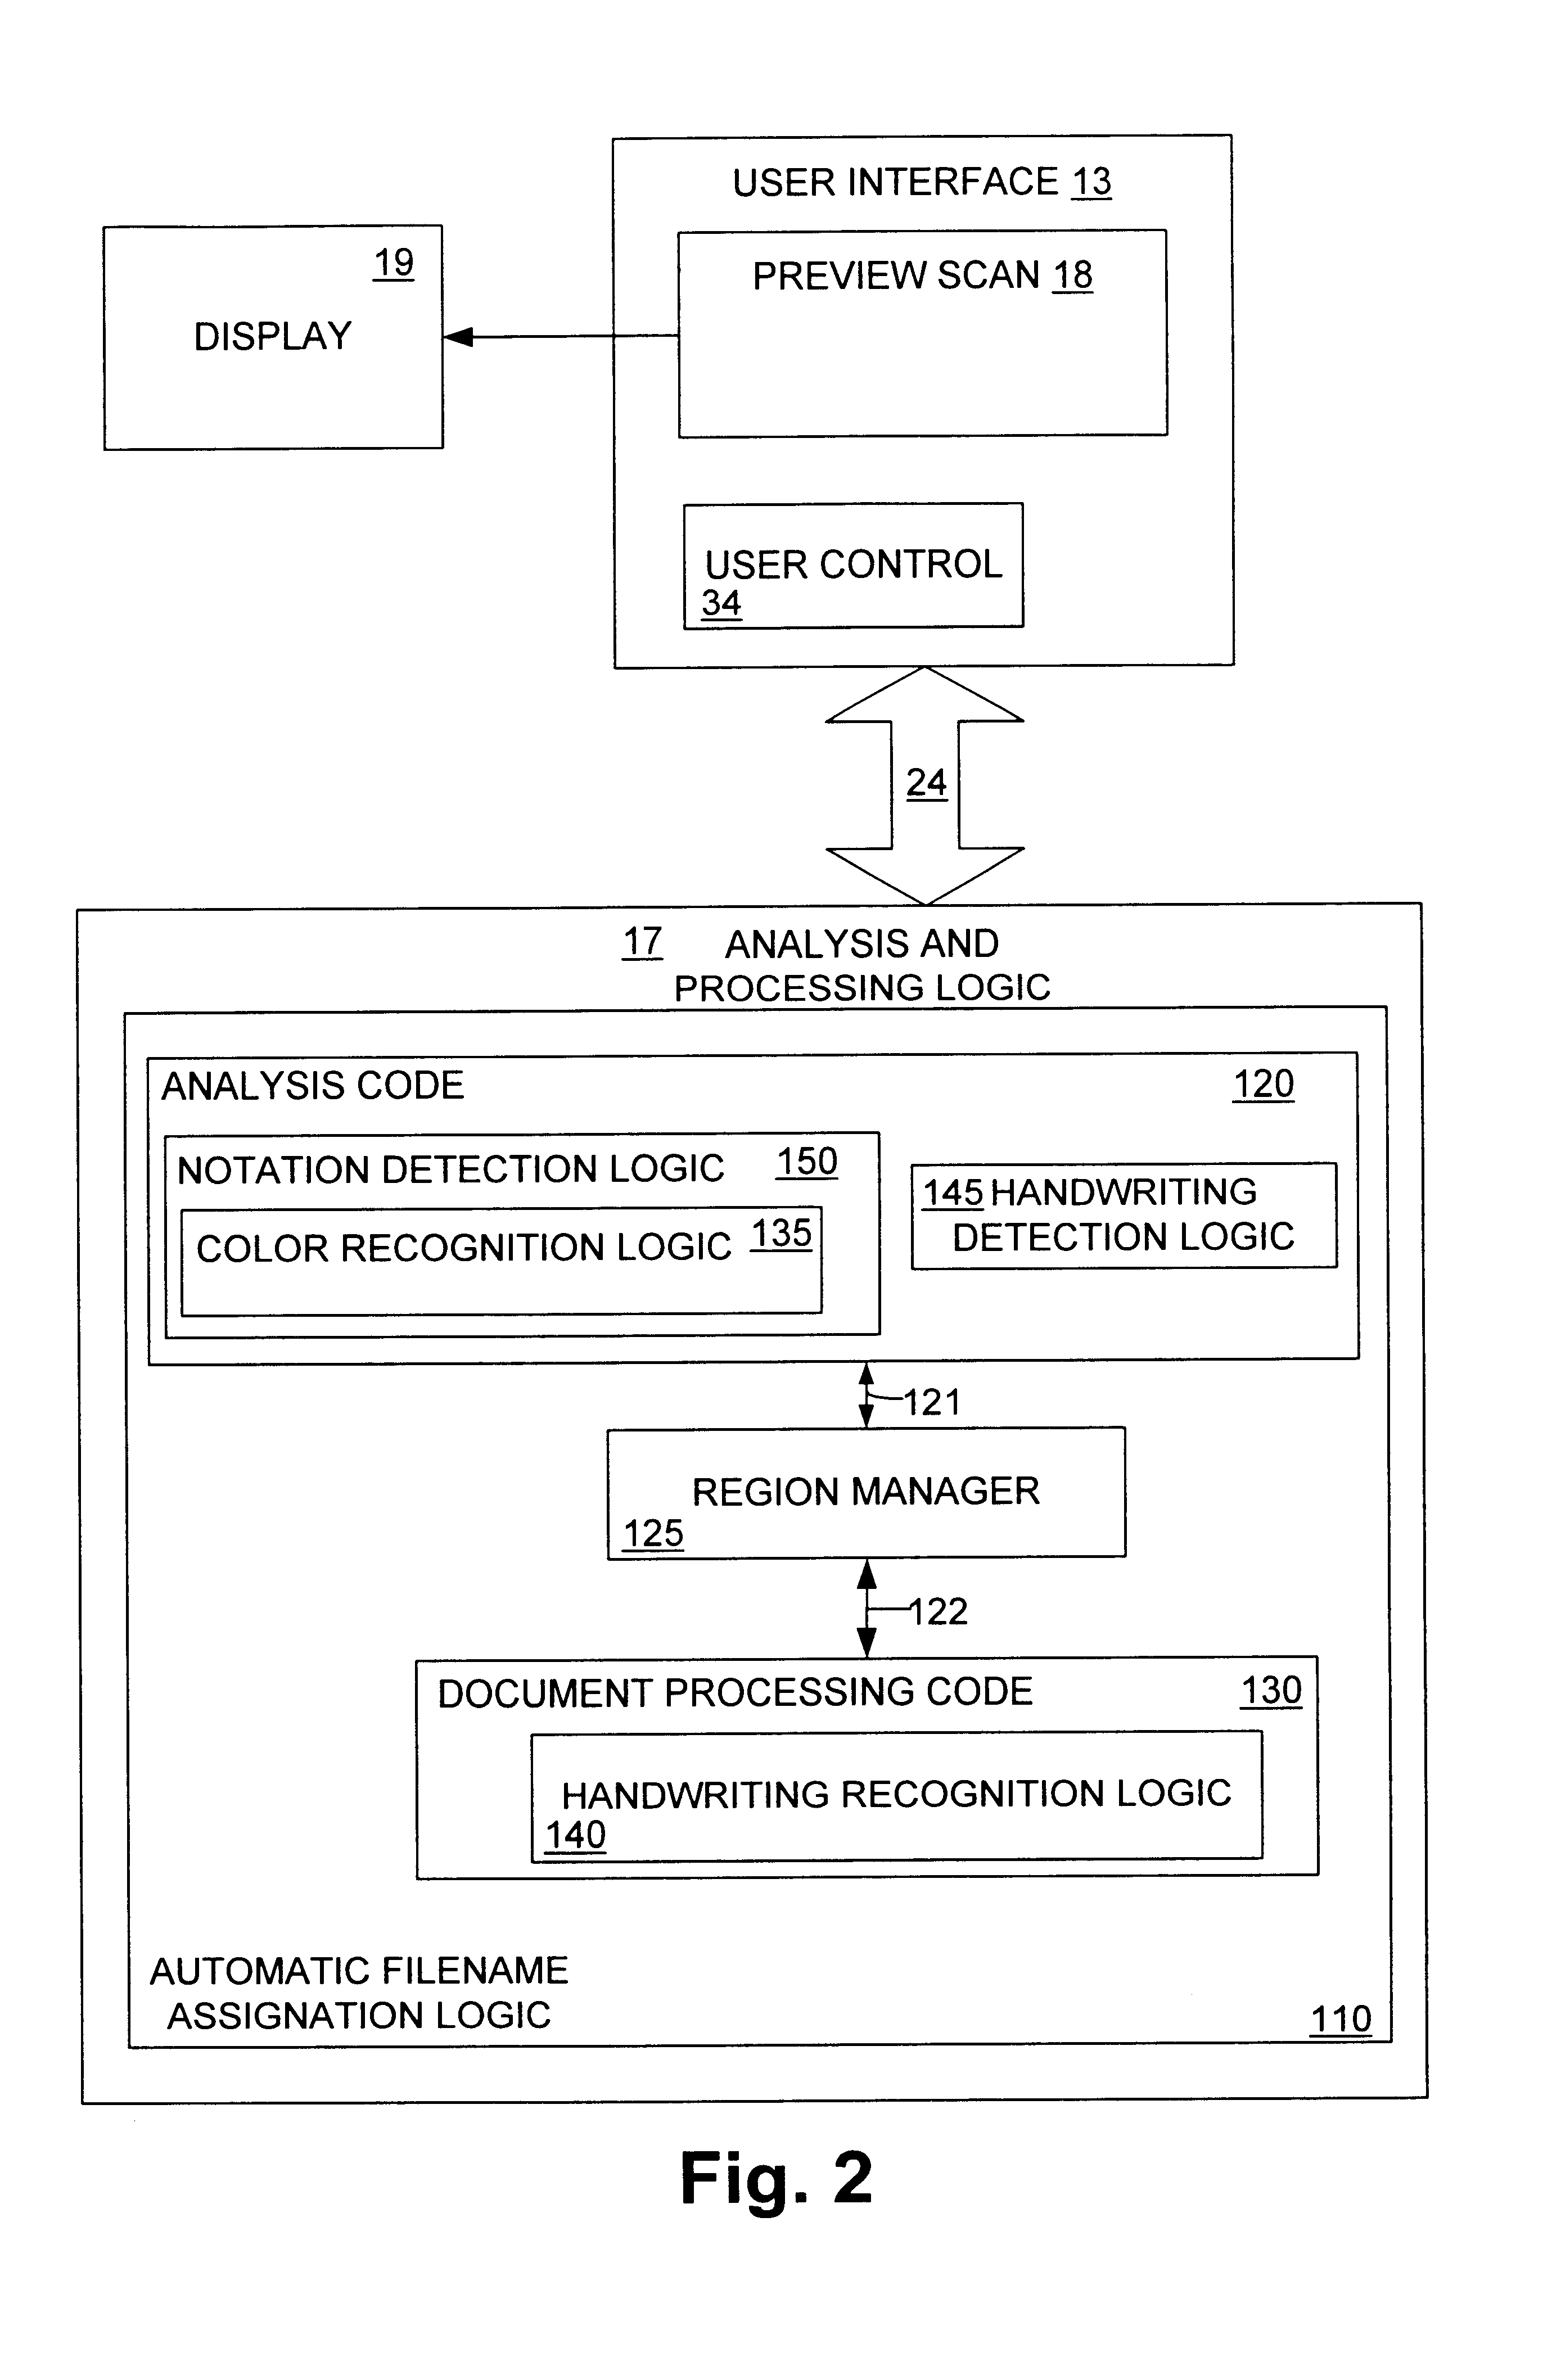 System and method for automatically assigning a filename to a scanned document